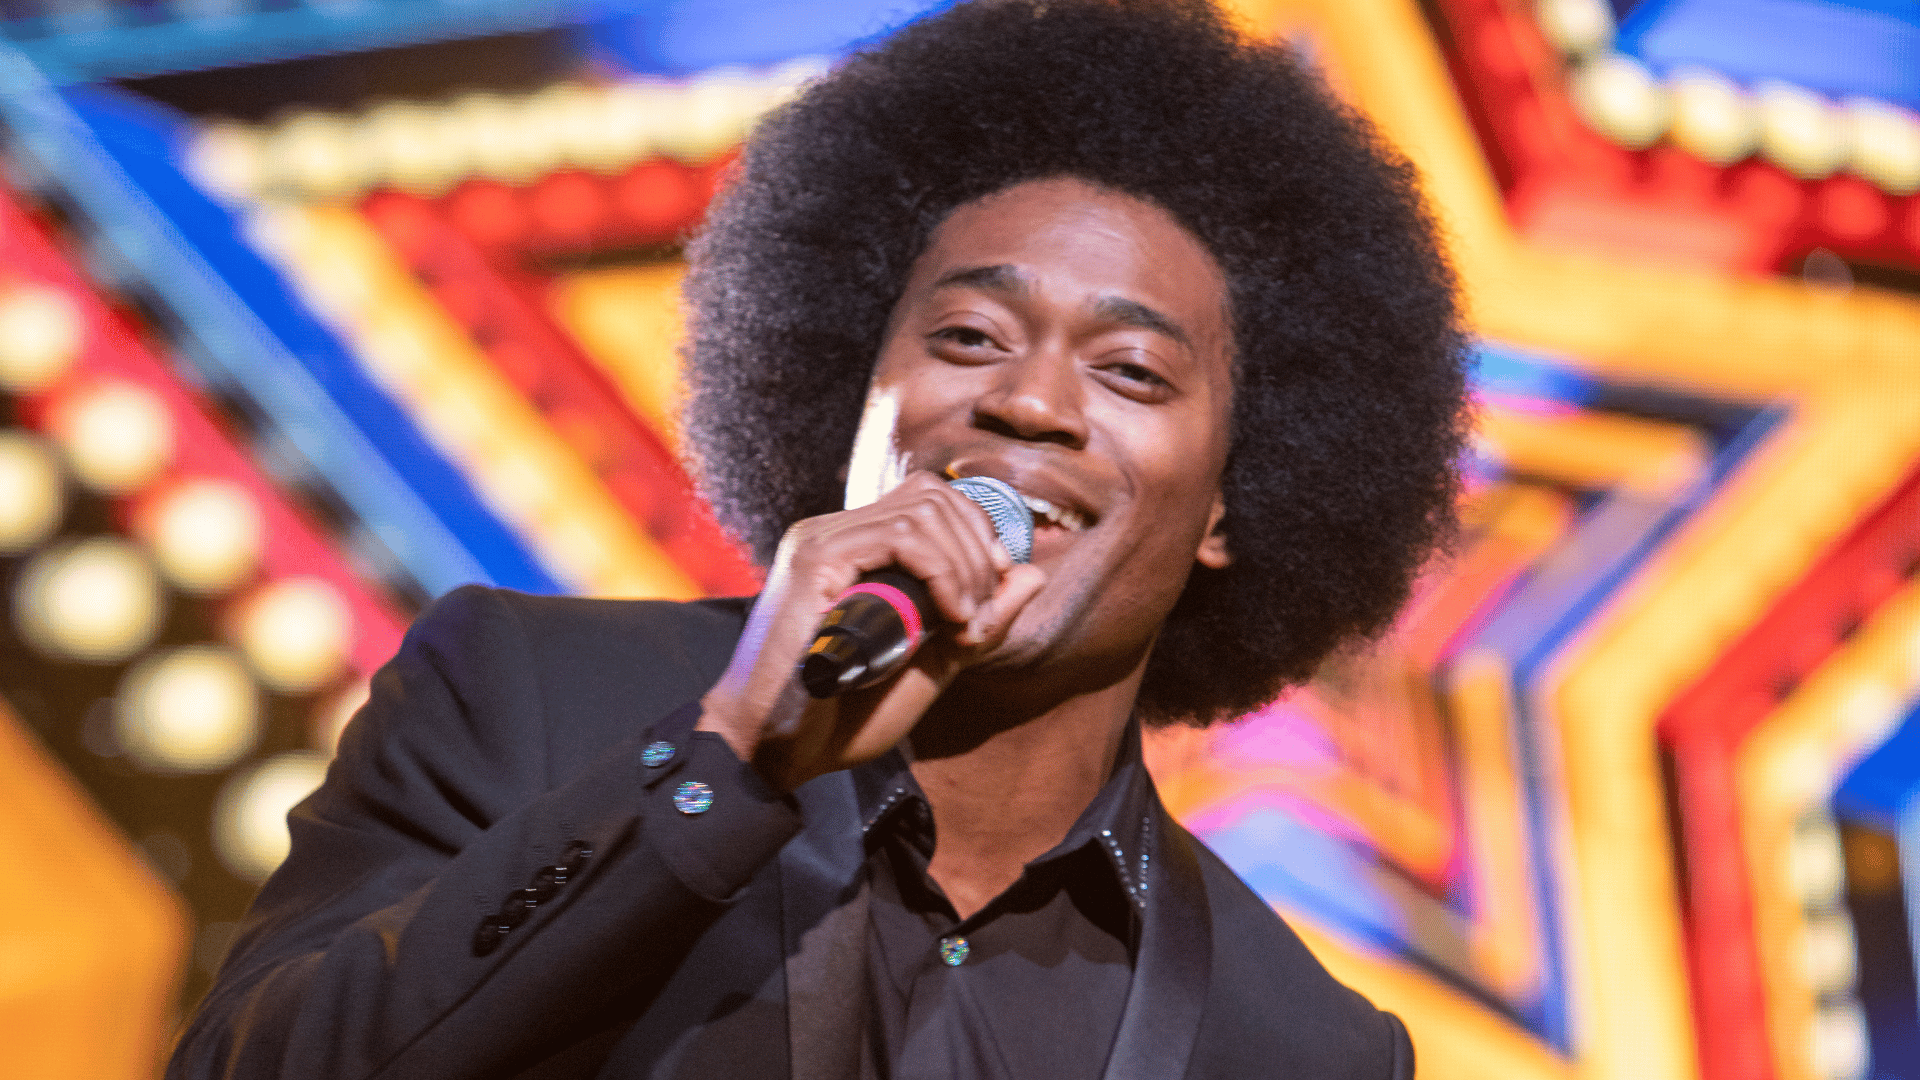 Lost in Music production shot: a close up of one of the male singers, who has a large afro and wear a smart suit